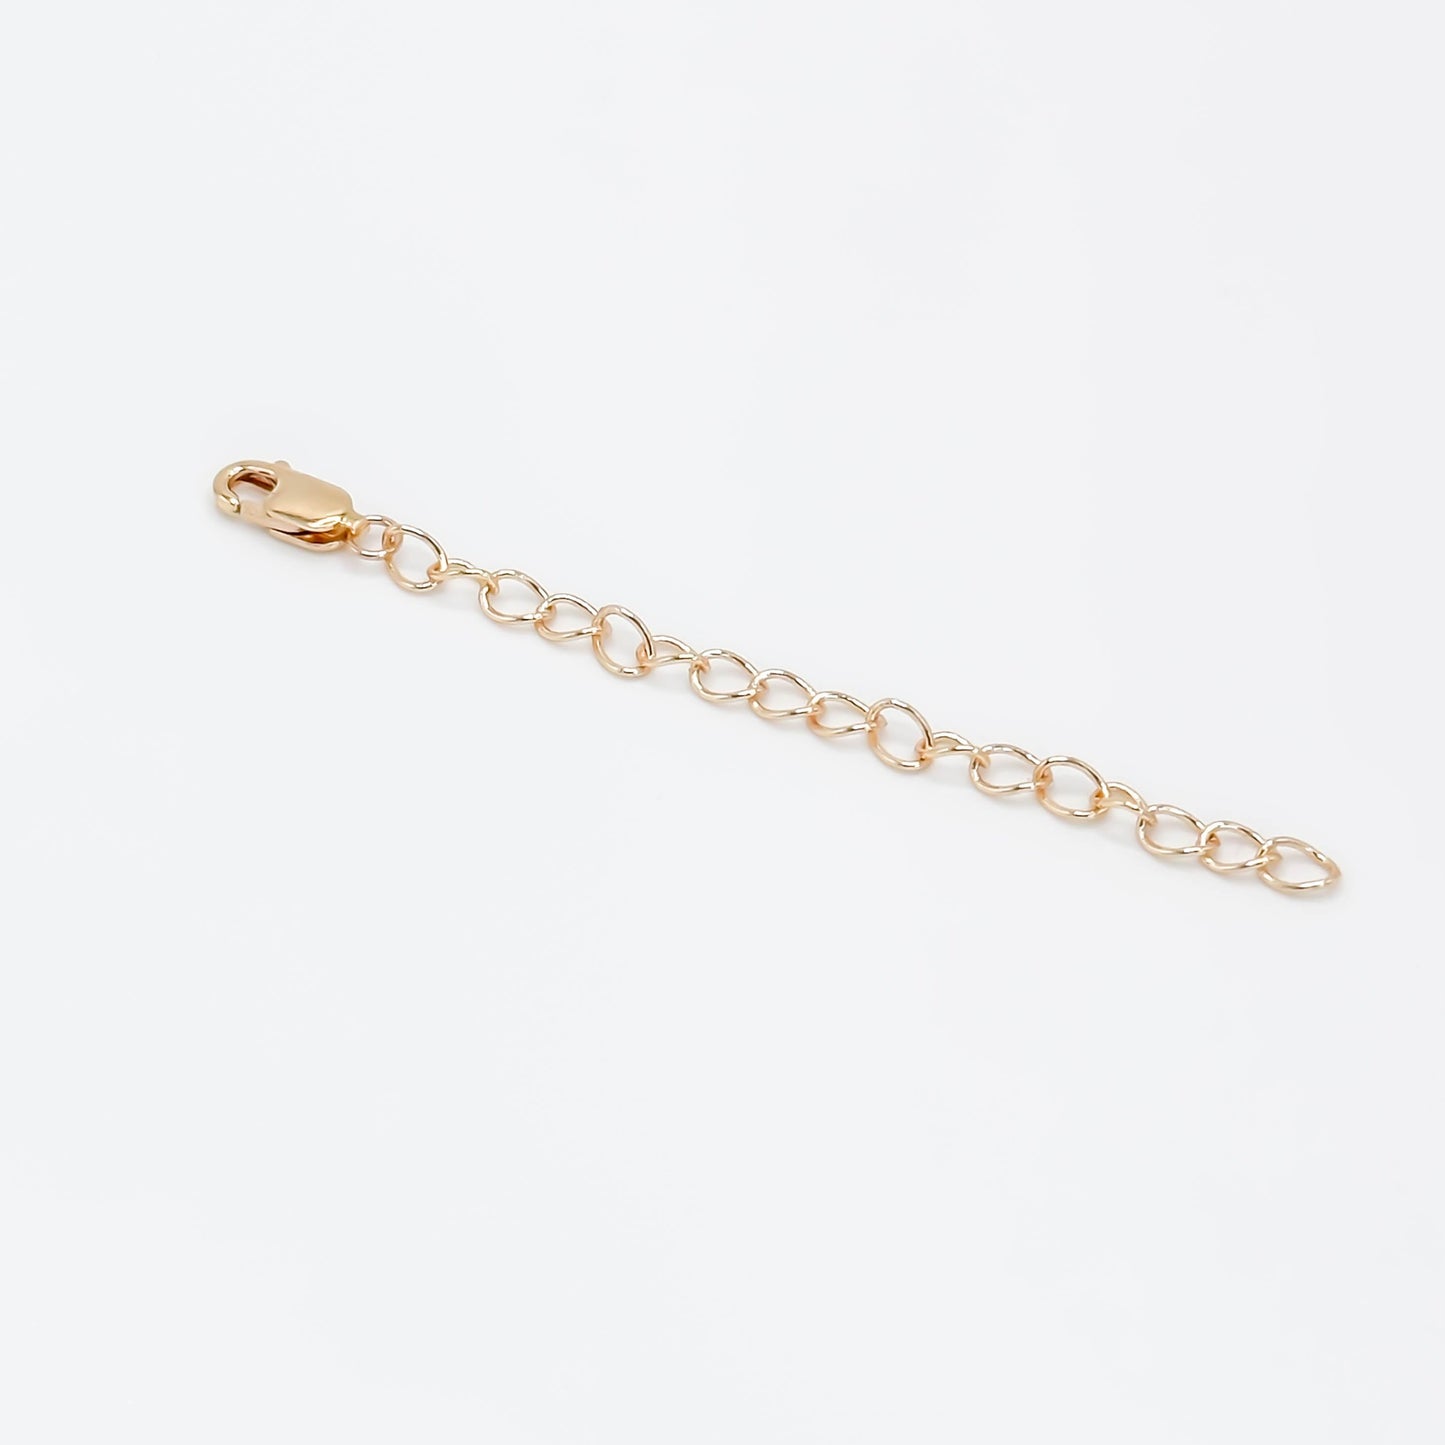 Extender Chain - 2 Inches